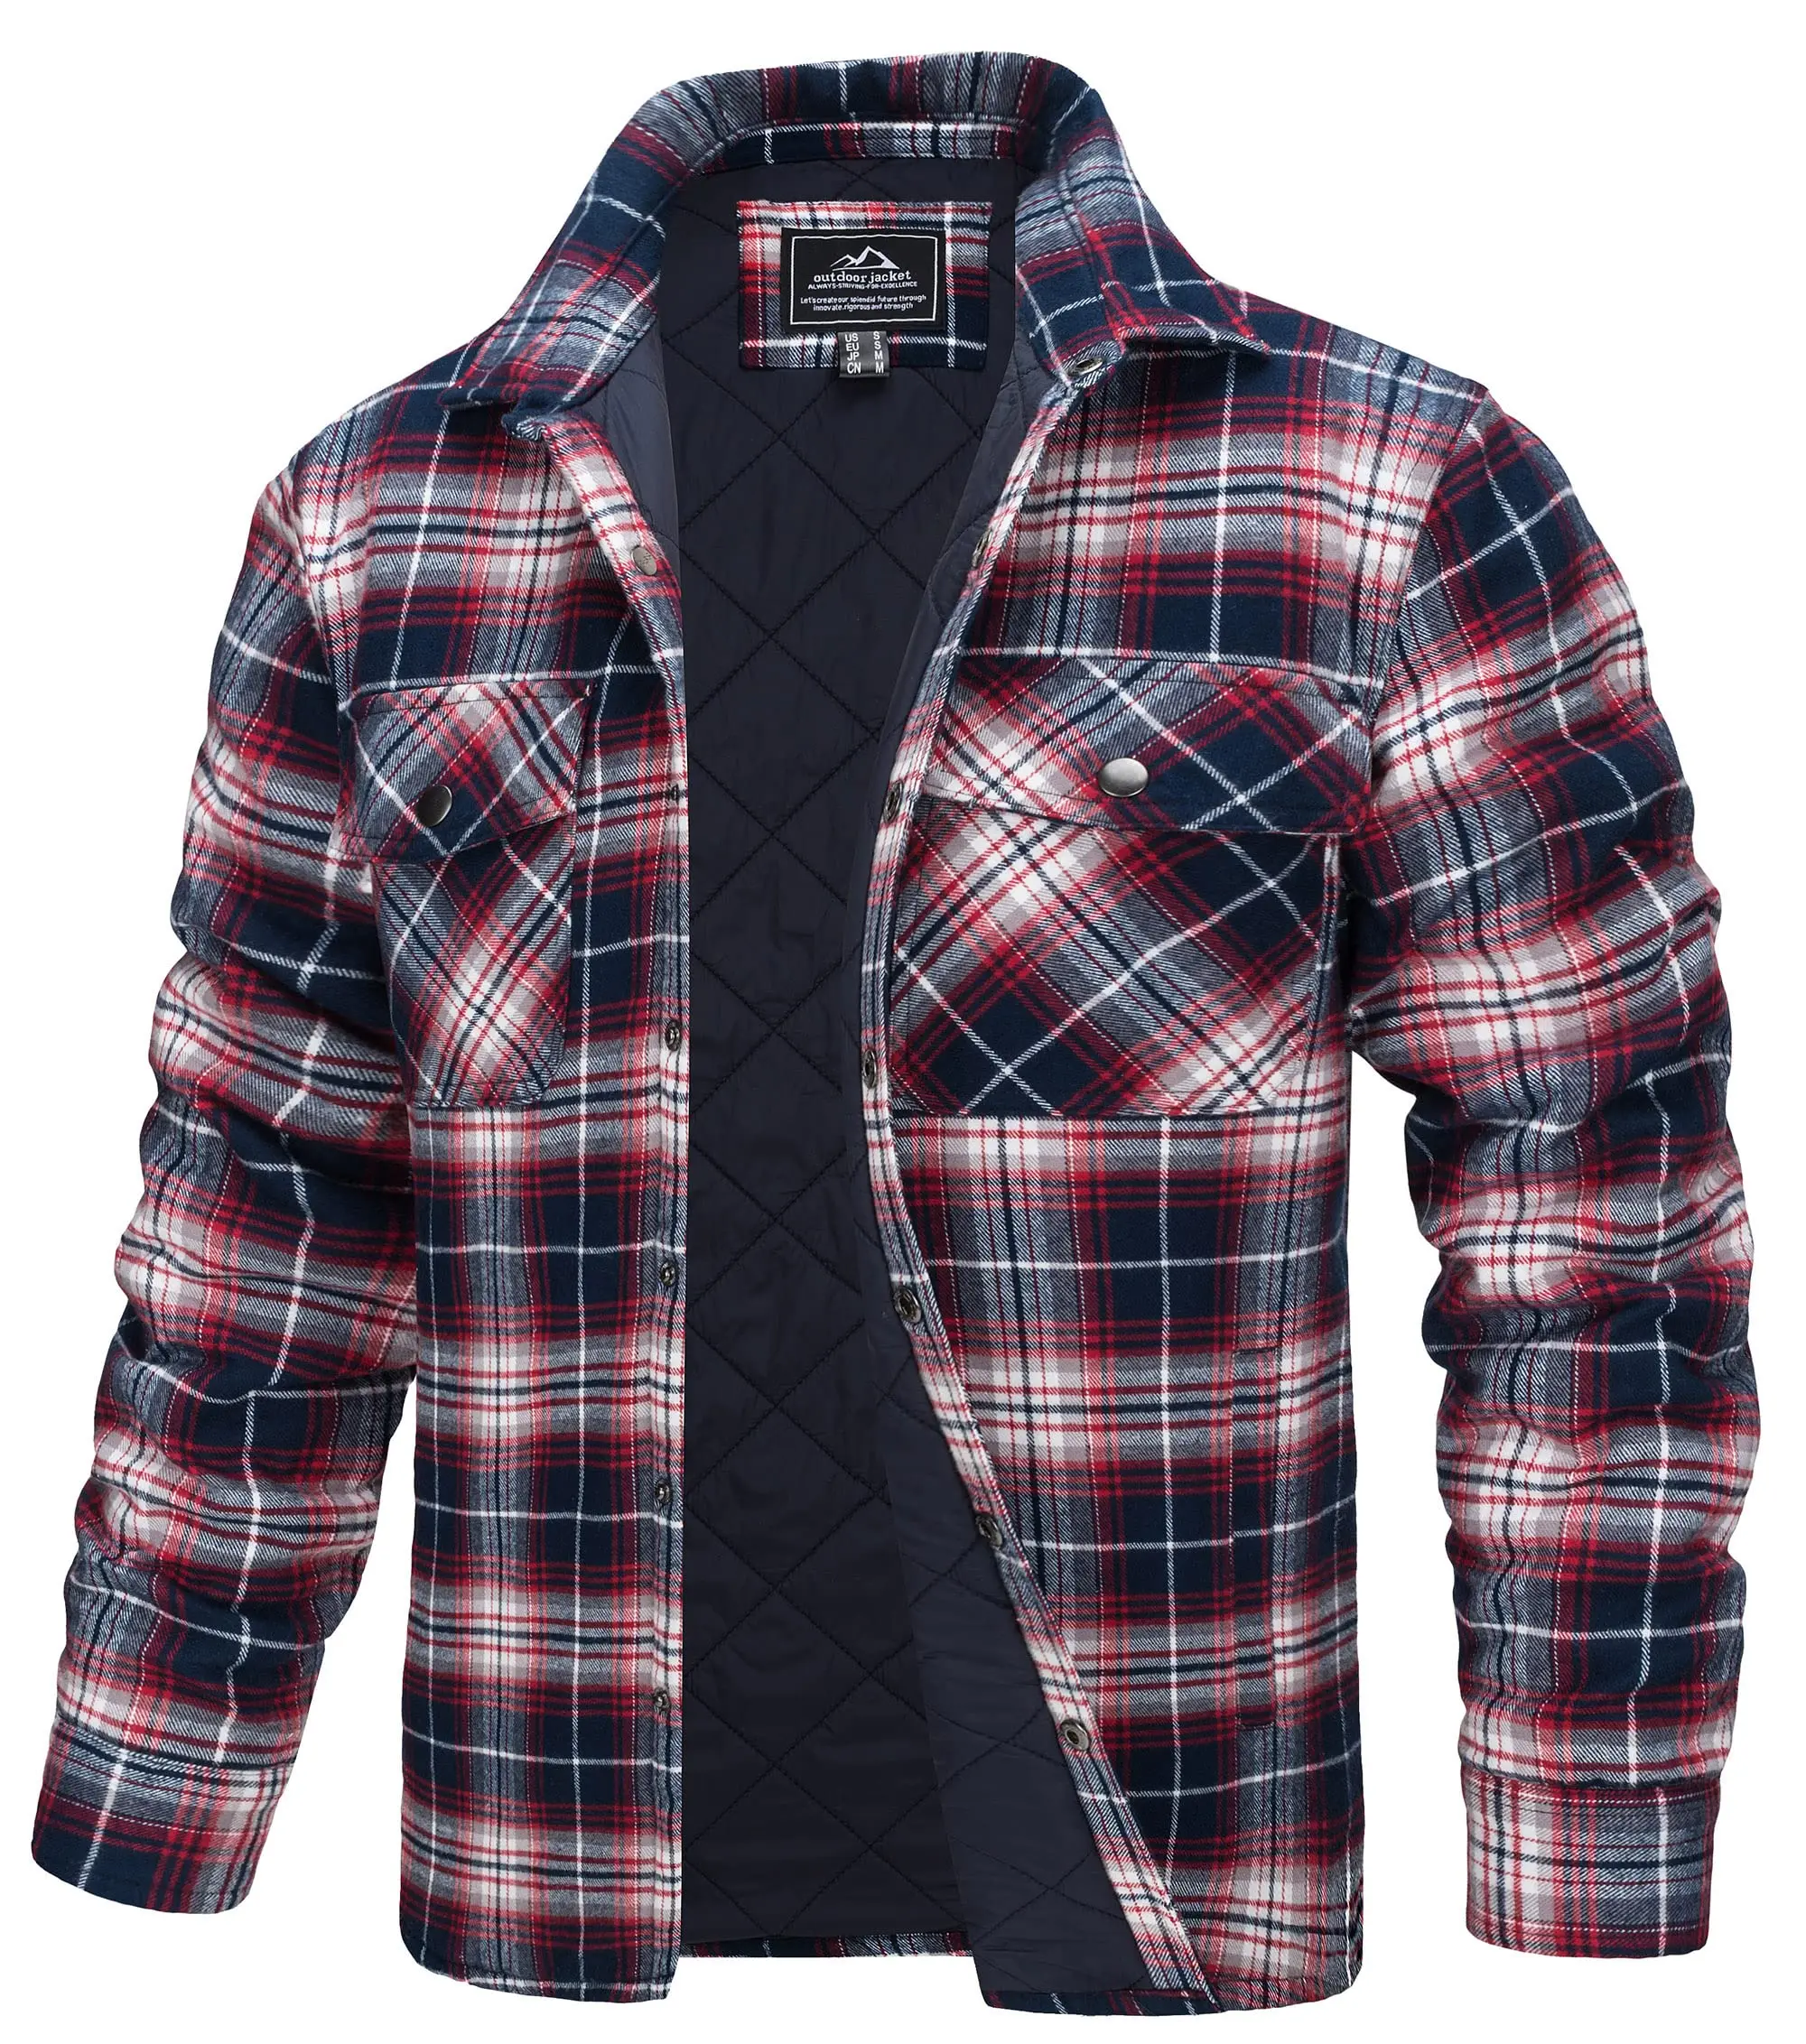 Winter Fashion 2022 Casual Flannel Shirt Jacket Multi-Pockets Outwear Mens Long Sleeve Plaid Cotton Lined Jackets Hiking Coats mens plaid patchwork pocket flannel shirt m gray